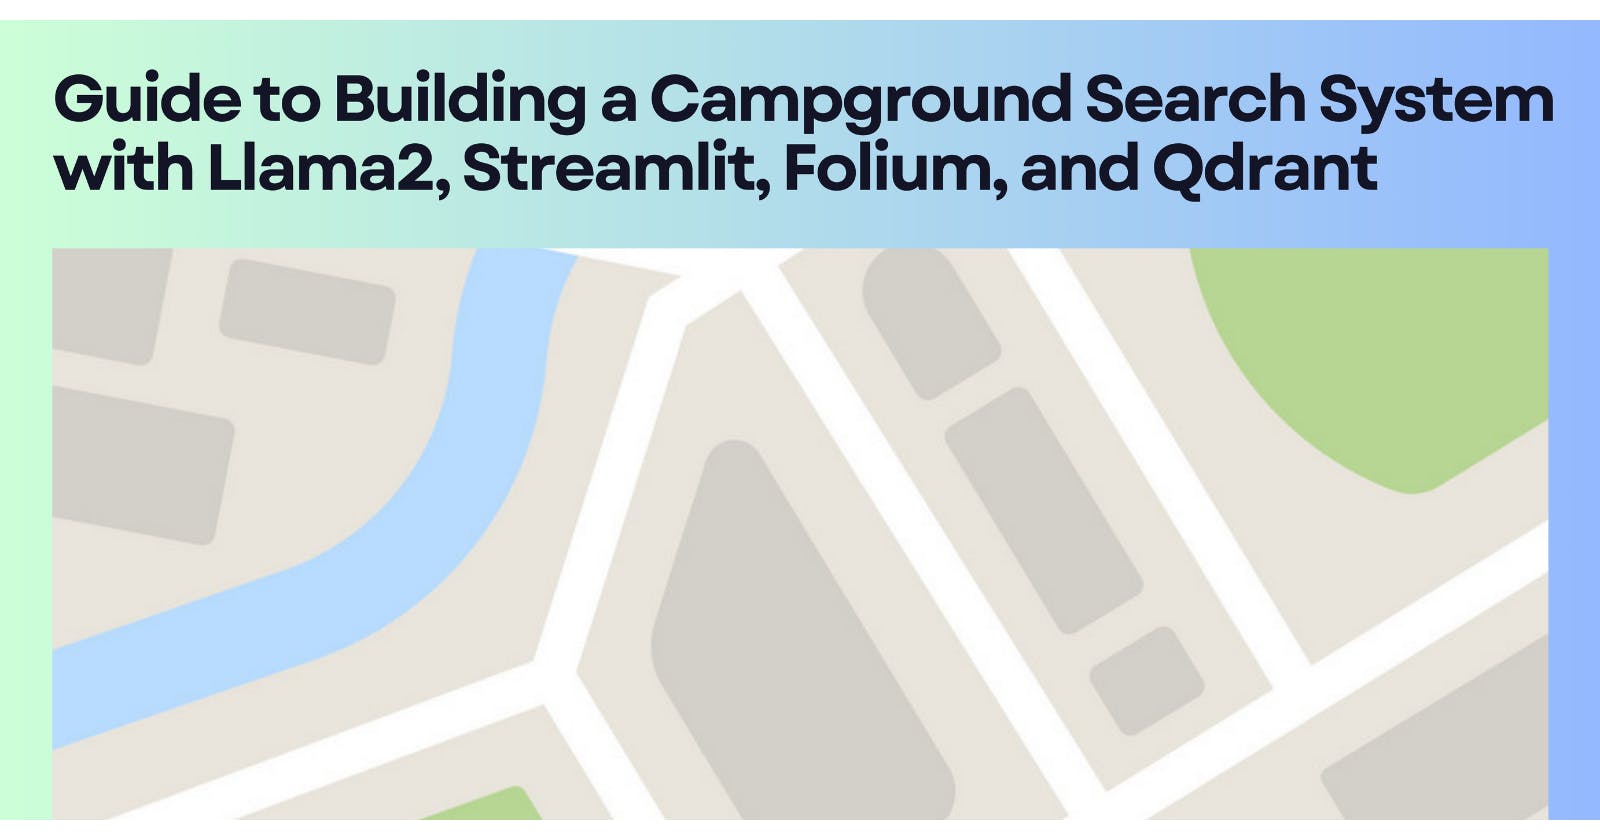 Guide to Building a Campground Search System with Llama2, Streamlit, Folium, and Qdrant